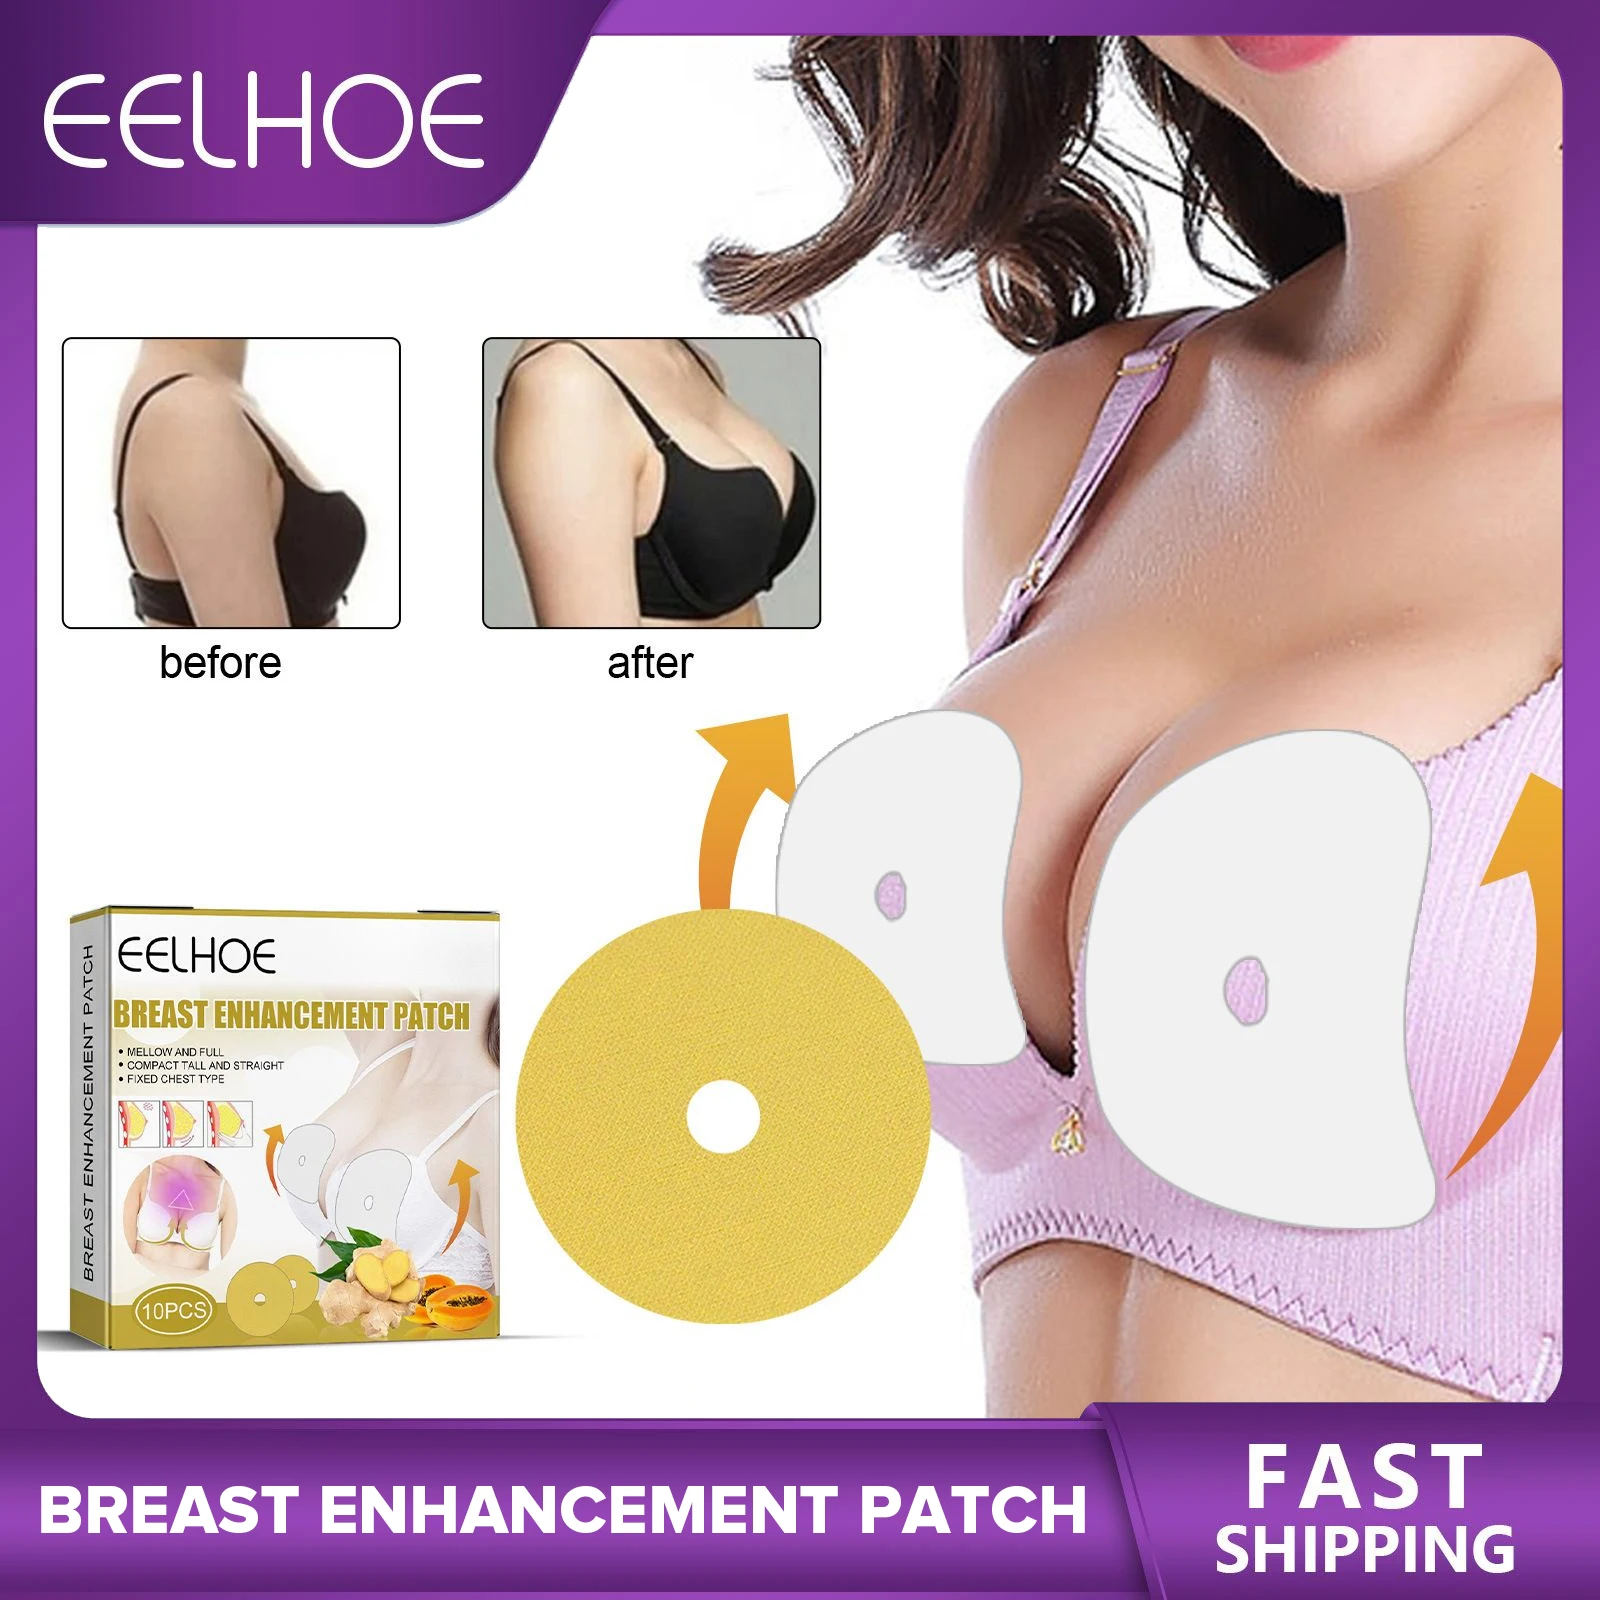 Breast Enhancement Patch Ginger Anti-sagging Breast Lifter Enhancer Stickers  Bust Enlargement Firming Treatment Women Body Care - Body Care Sets  Kits  - AliExpress